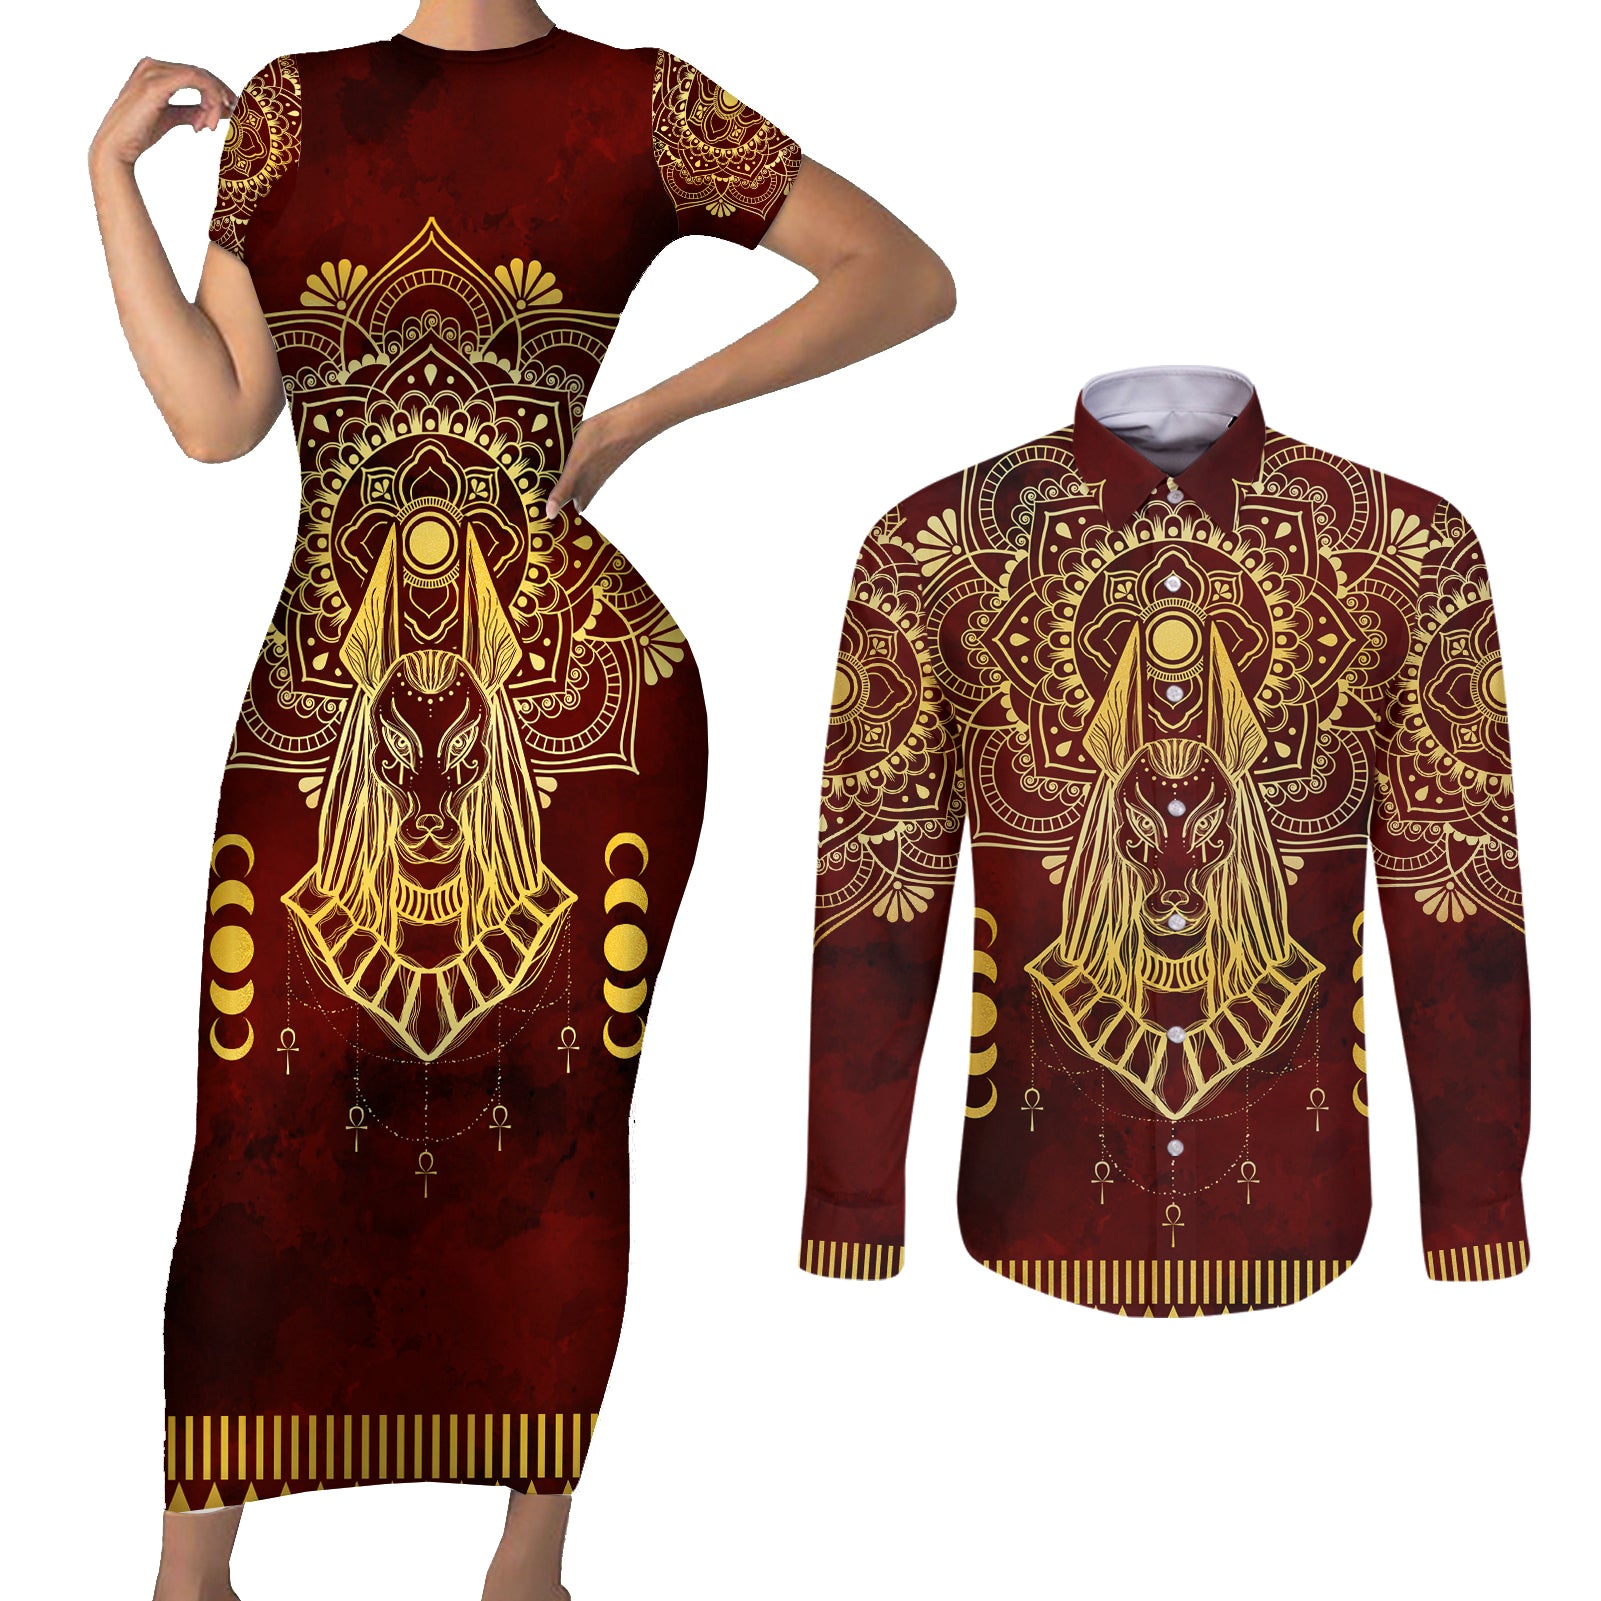 Personalized Anubis Couples Matching Short Sleeve Bodycon Dress and Long Sleeve Button Shirt Ancient Egyptian Pattern In Red